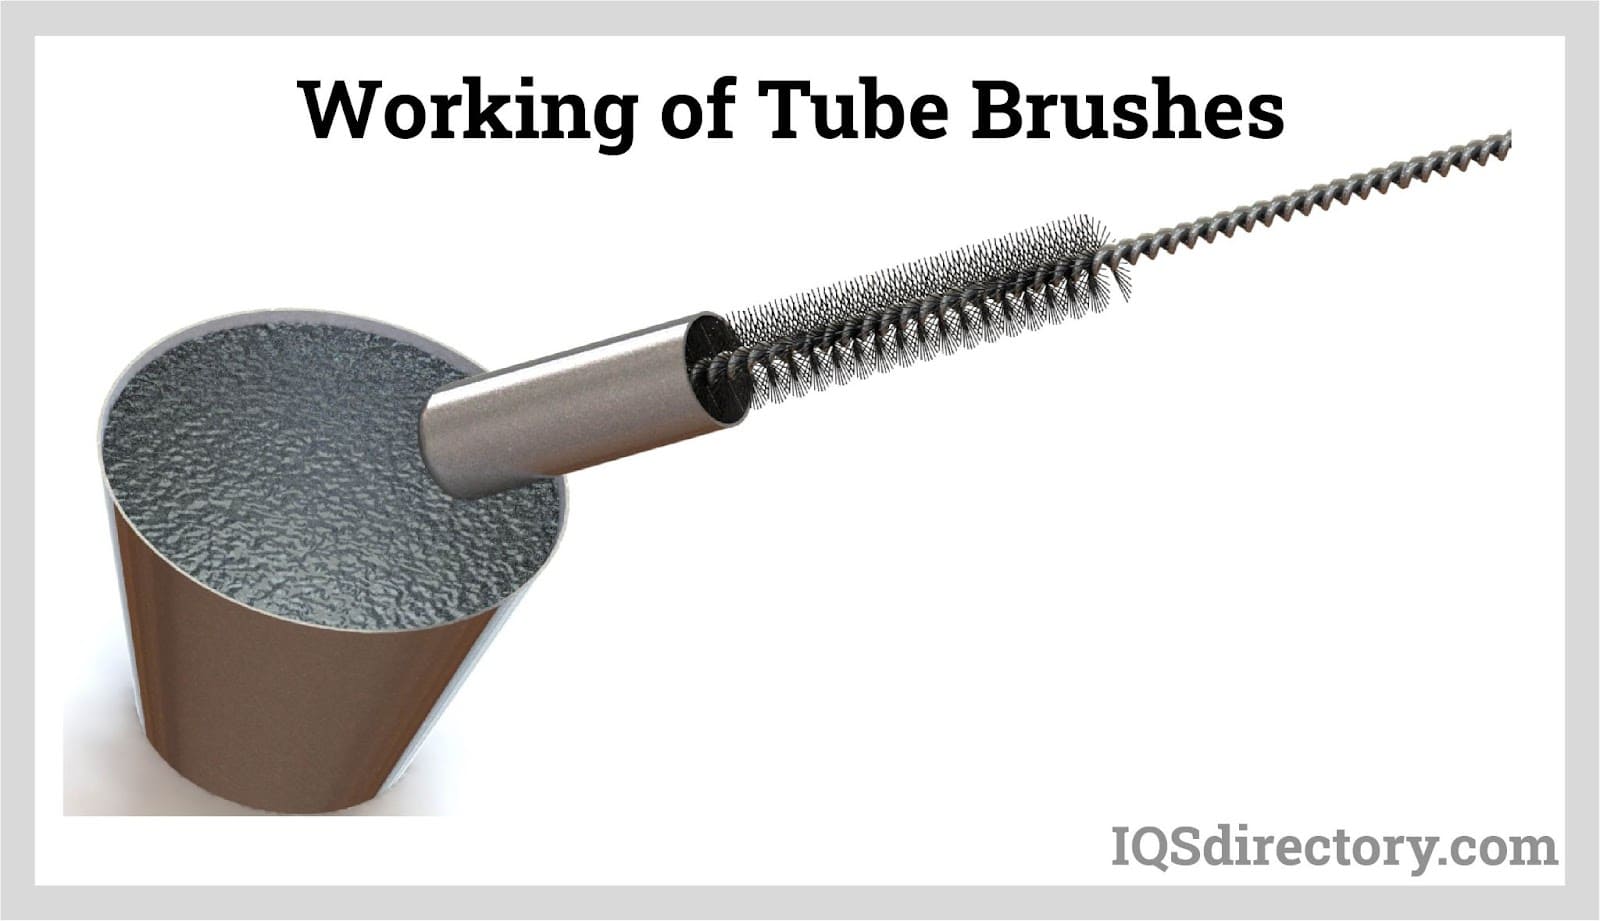 Working with Tube Brushes